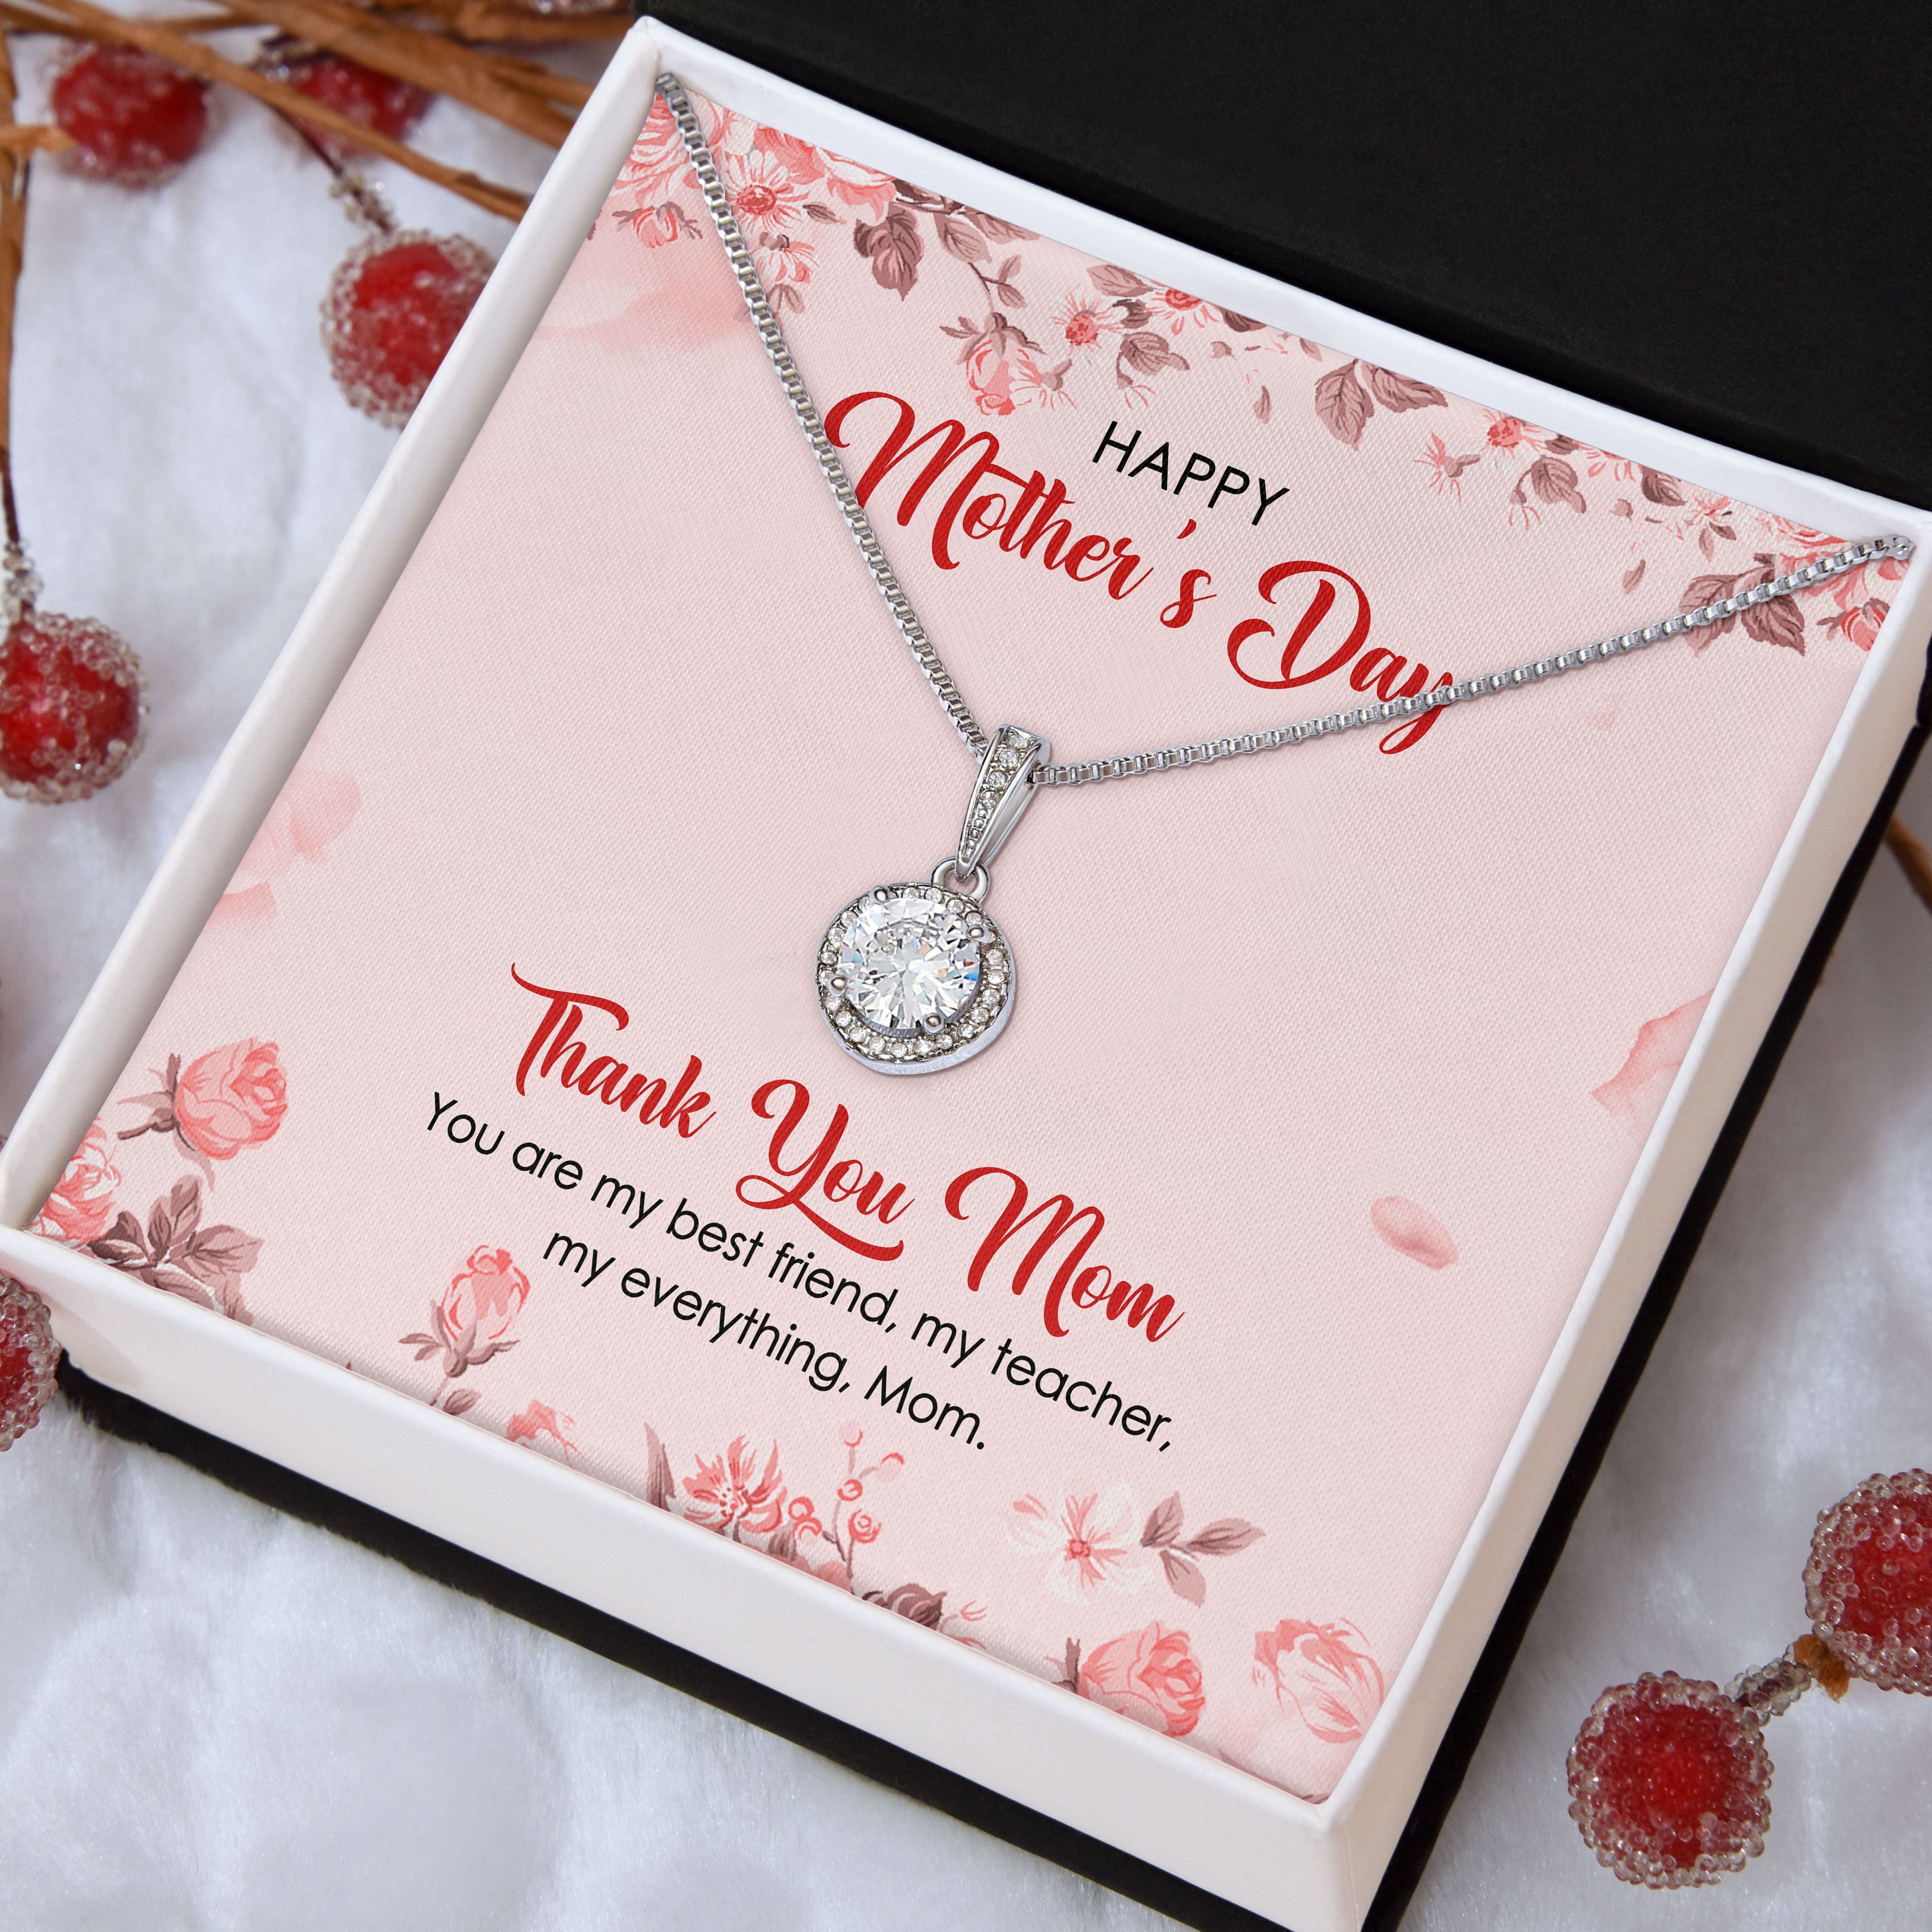 You Are My Best Friend My Teacher, Mother's Day Necklace, Mother's Day Gift, Gift For Mom